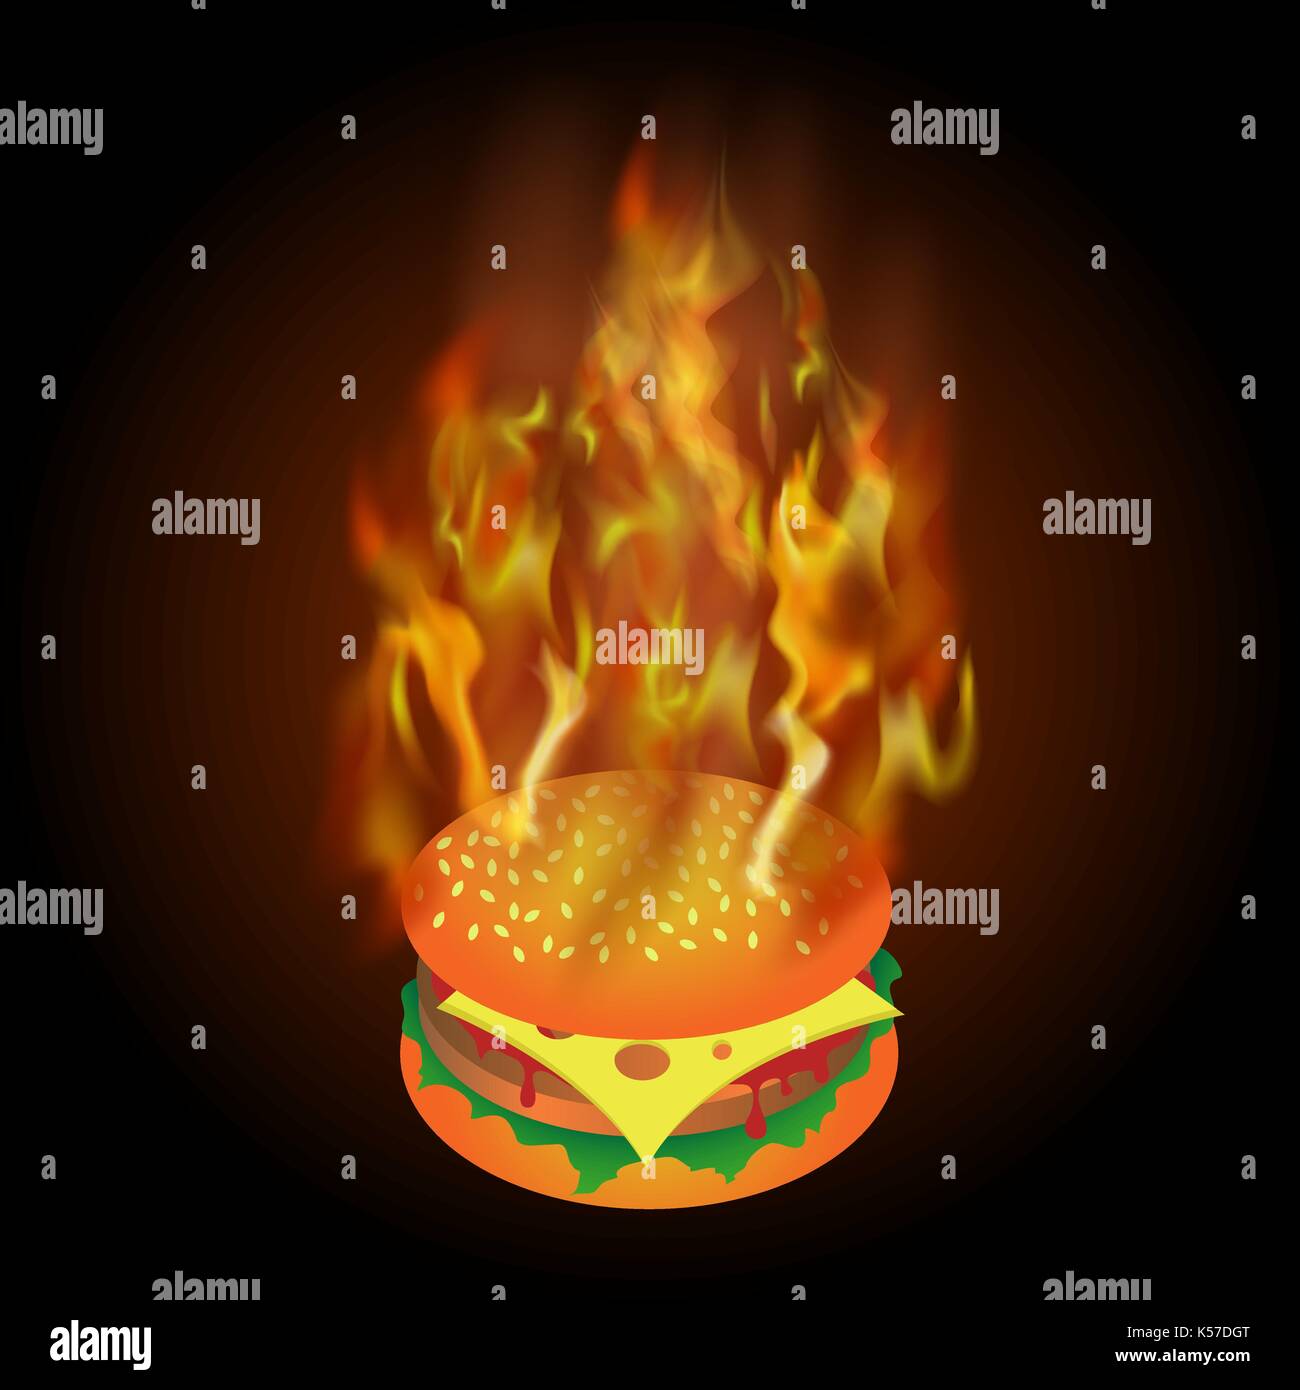 Burning Fresh Hamburger with Fire Flame Stock Vector